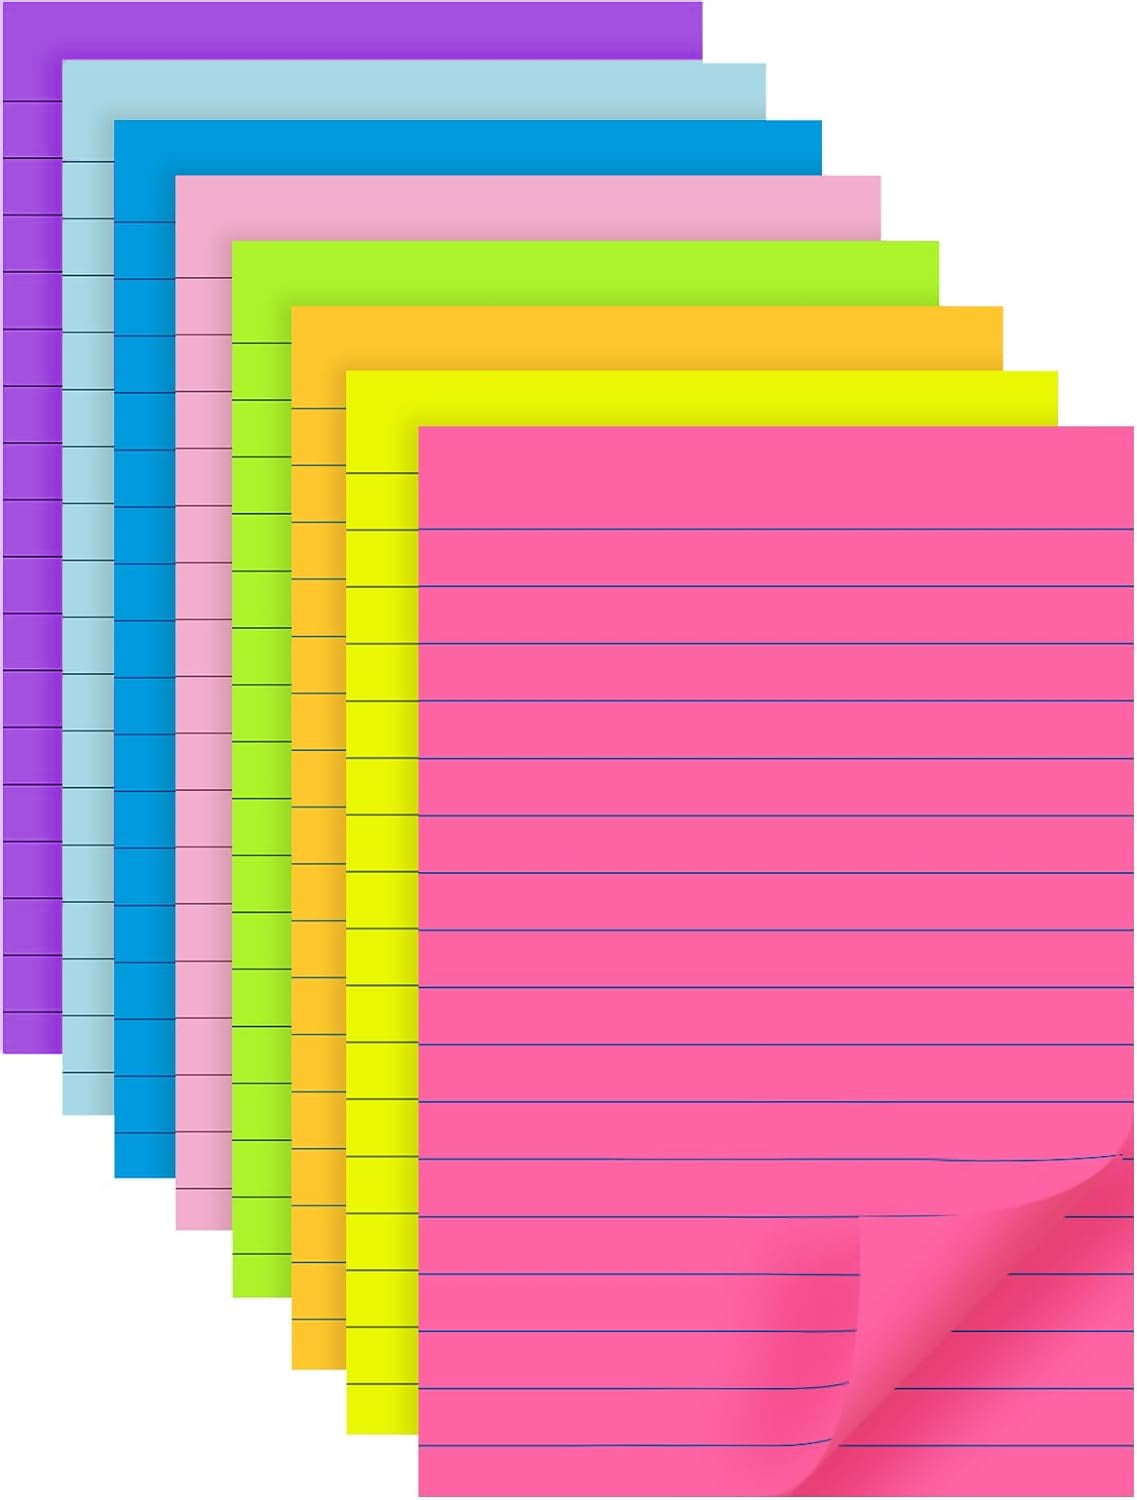 The Mizzou Store - Post-it 2x2 Assorted Colors Notes Cube